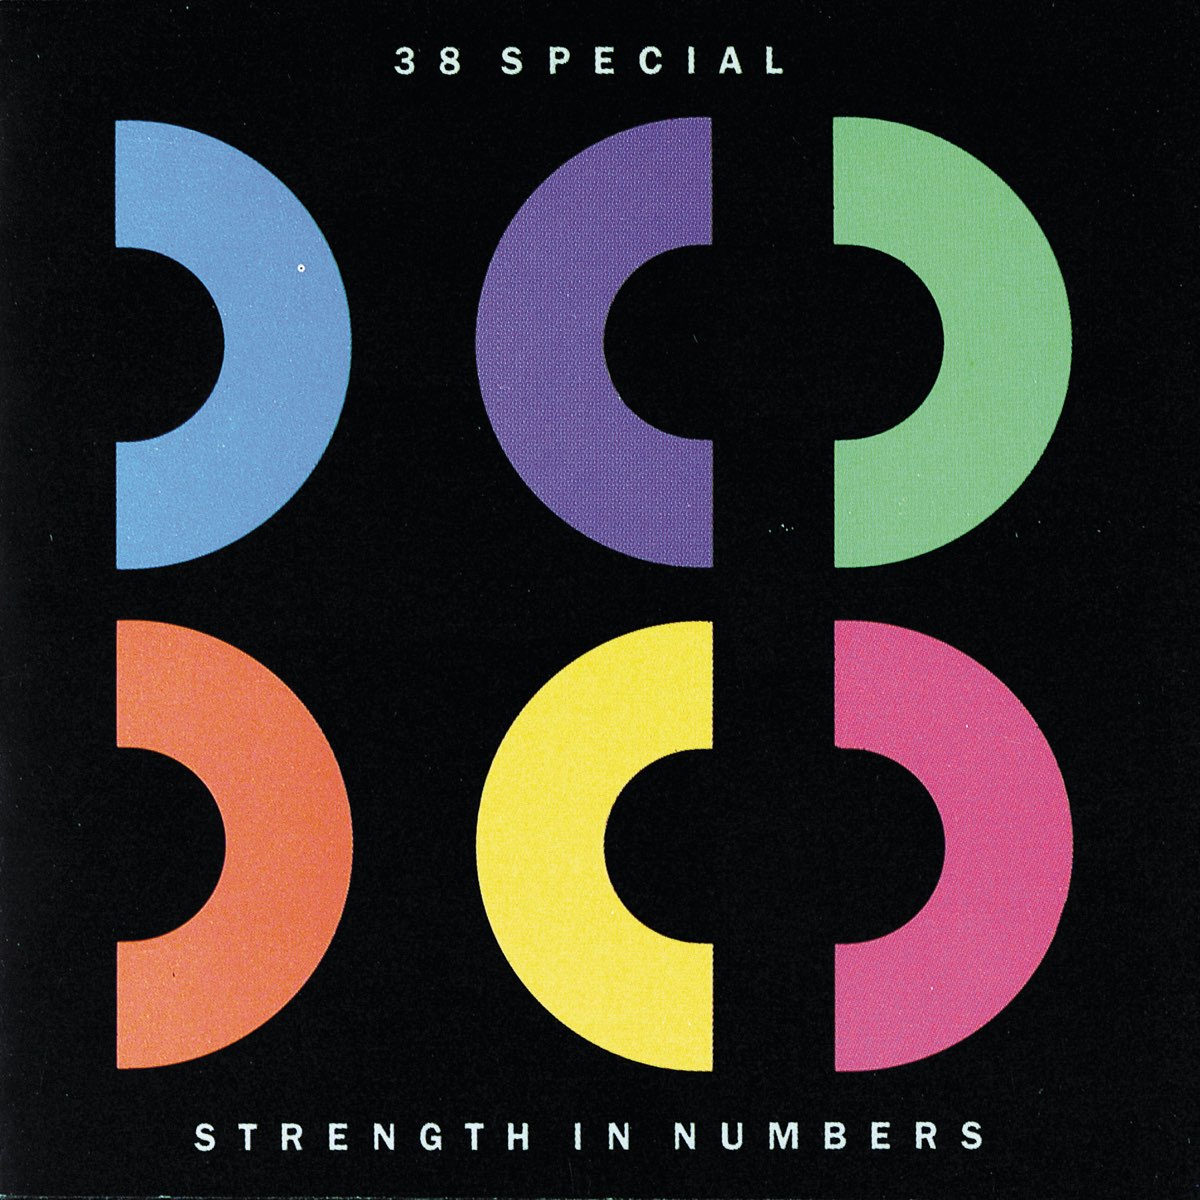 38 special strength in numbers tour